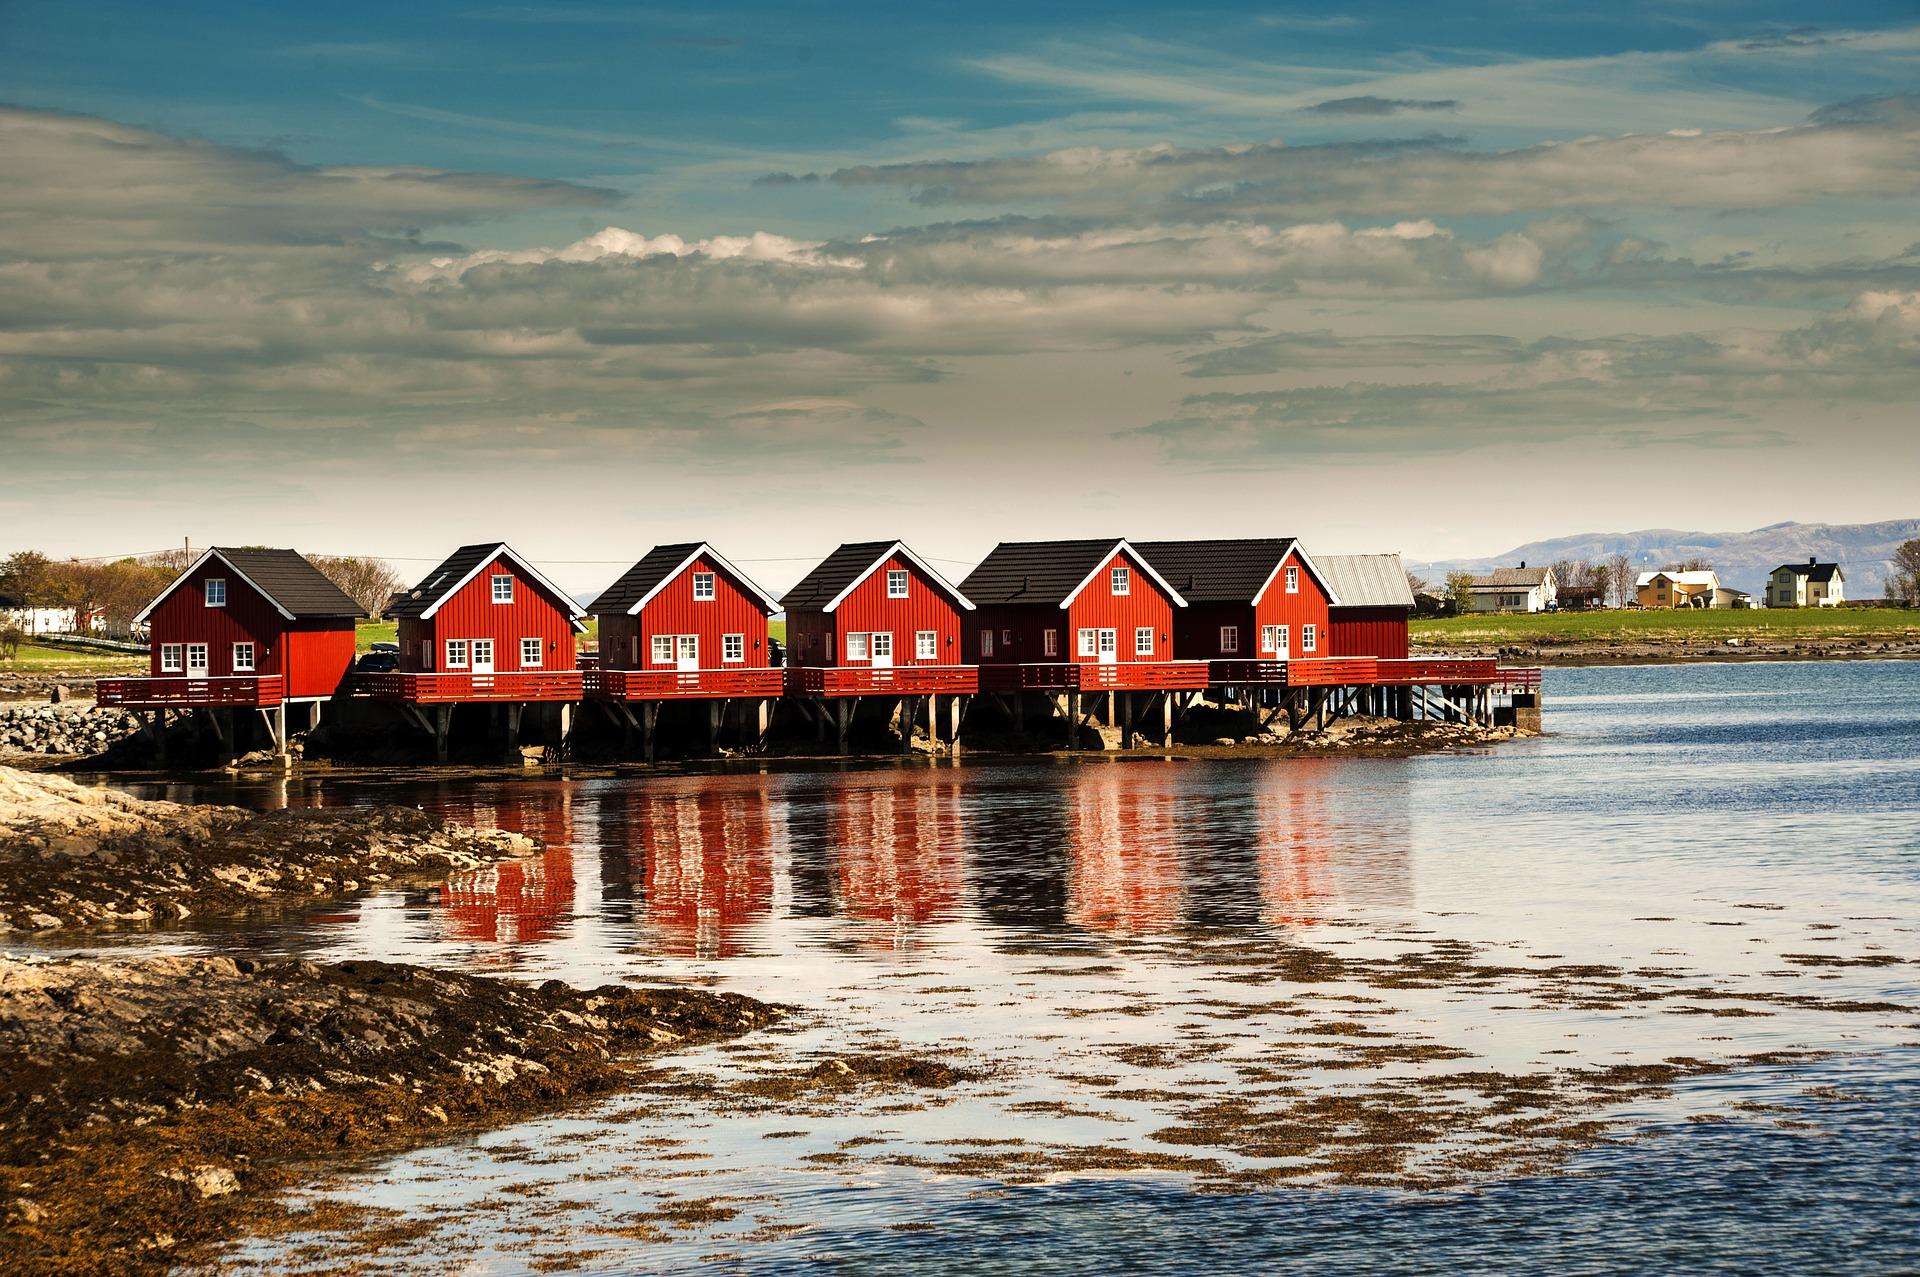 10 Best Denmark, Norway And Sweden Tours & Trips 2021/2022 - NEW